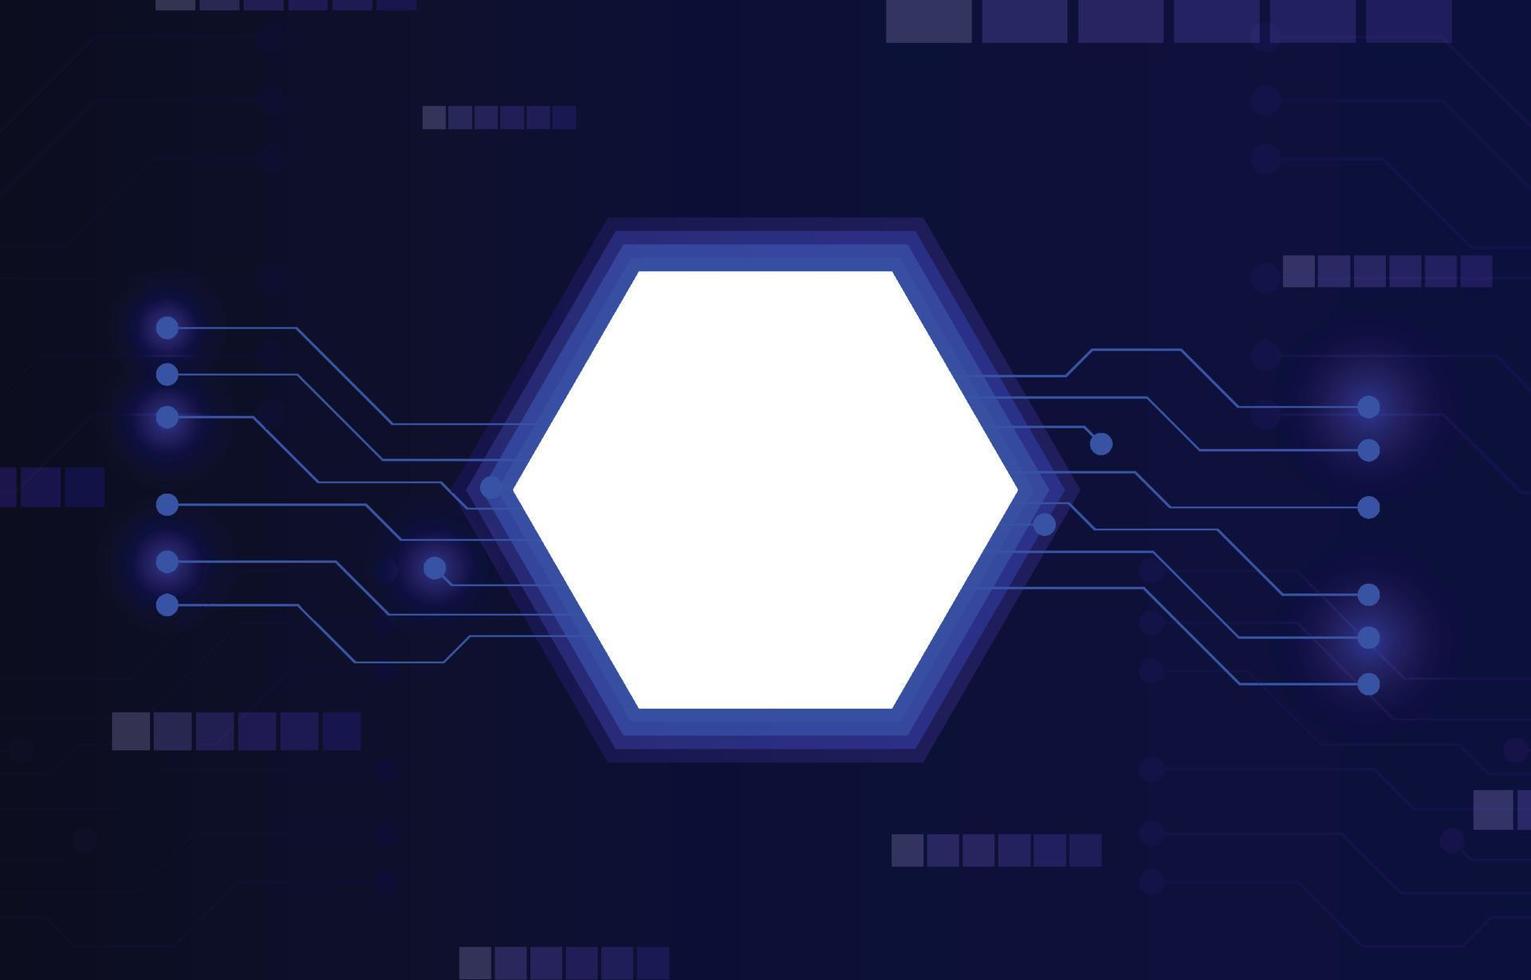 hexagon and circuit technology with square shapes on dark blue background. abstract futuristic Illustration Vector Glowing design digital social network connect concept.